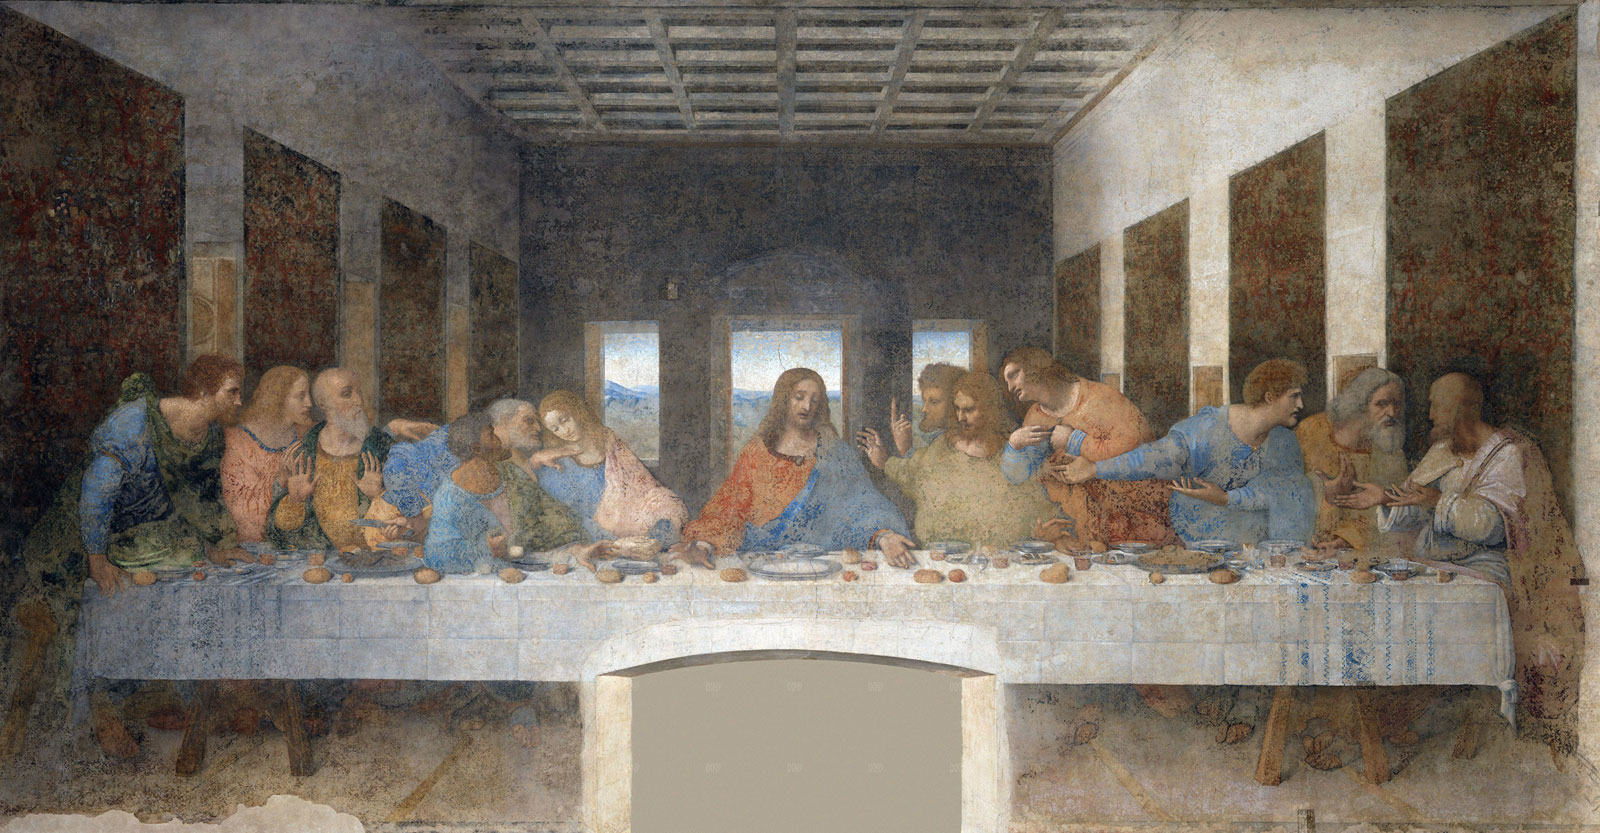 The resurrection of the “Last Supper”